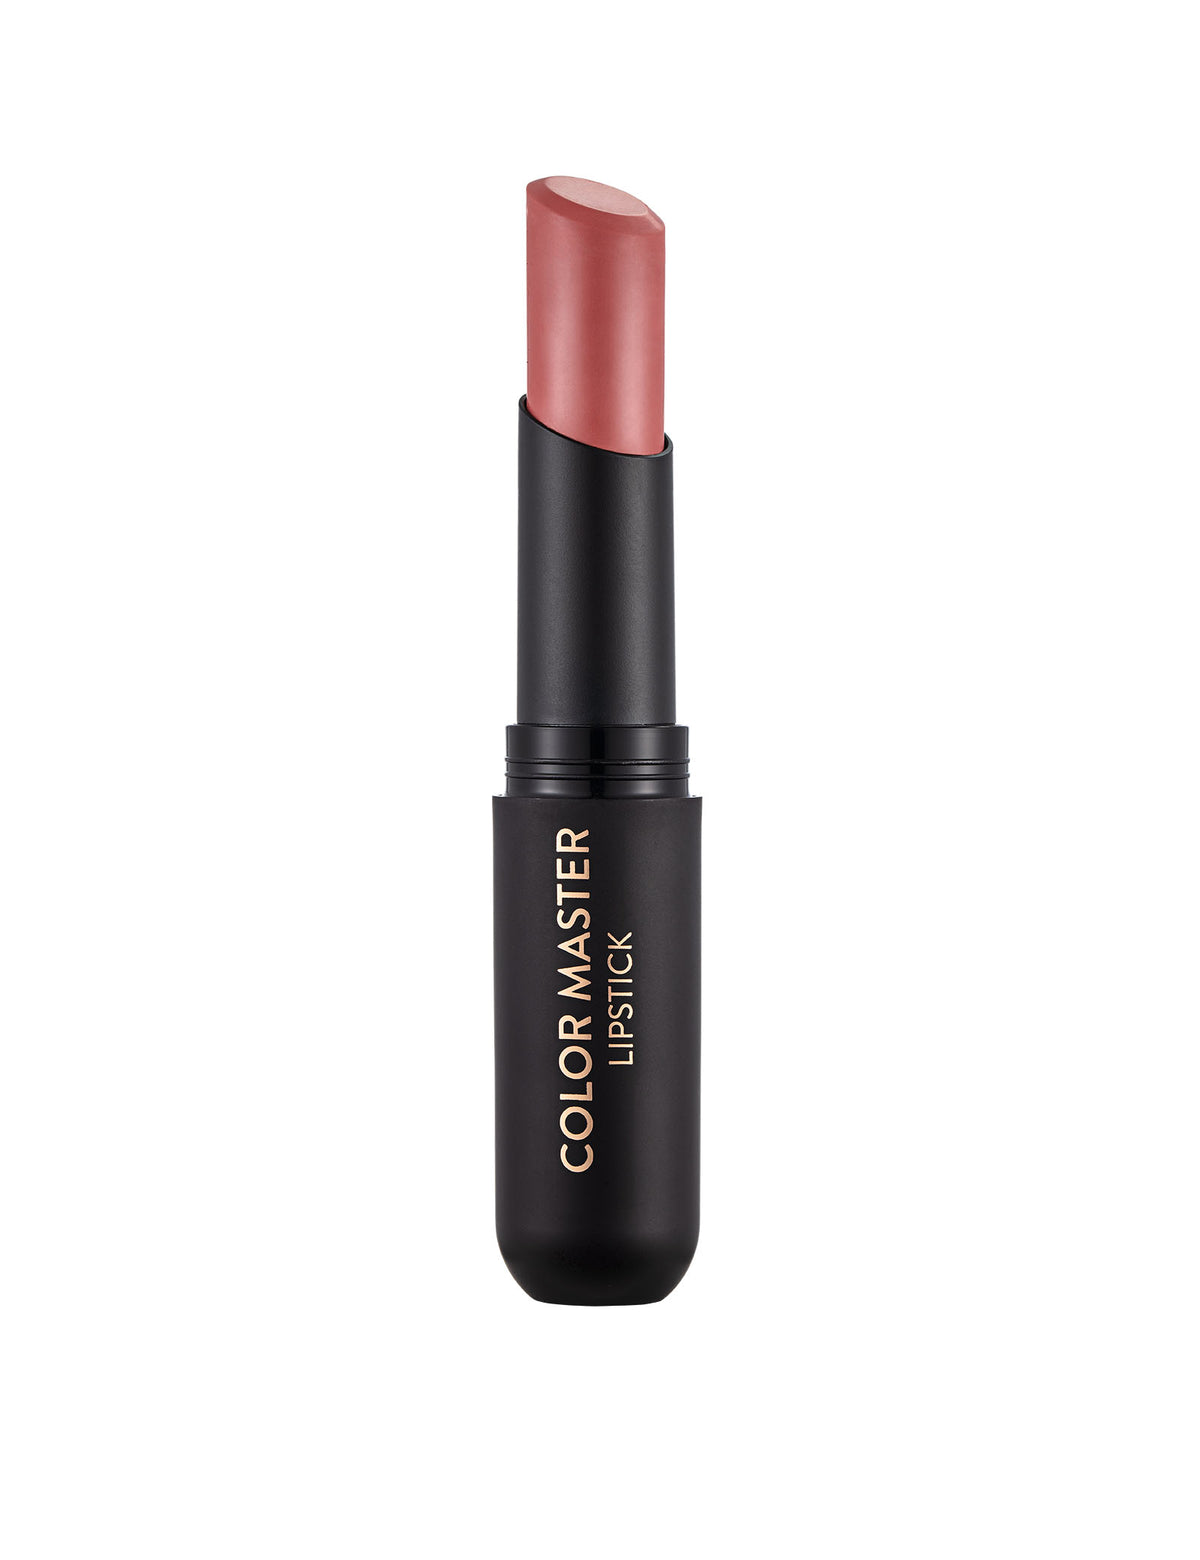 Flormar Color Master Lipstick - 03 Daily Must